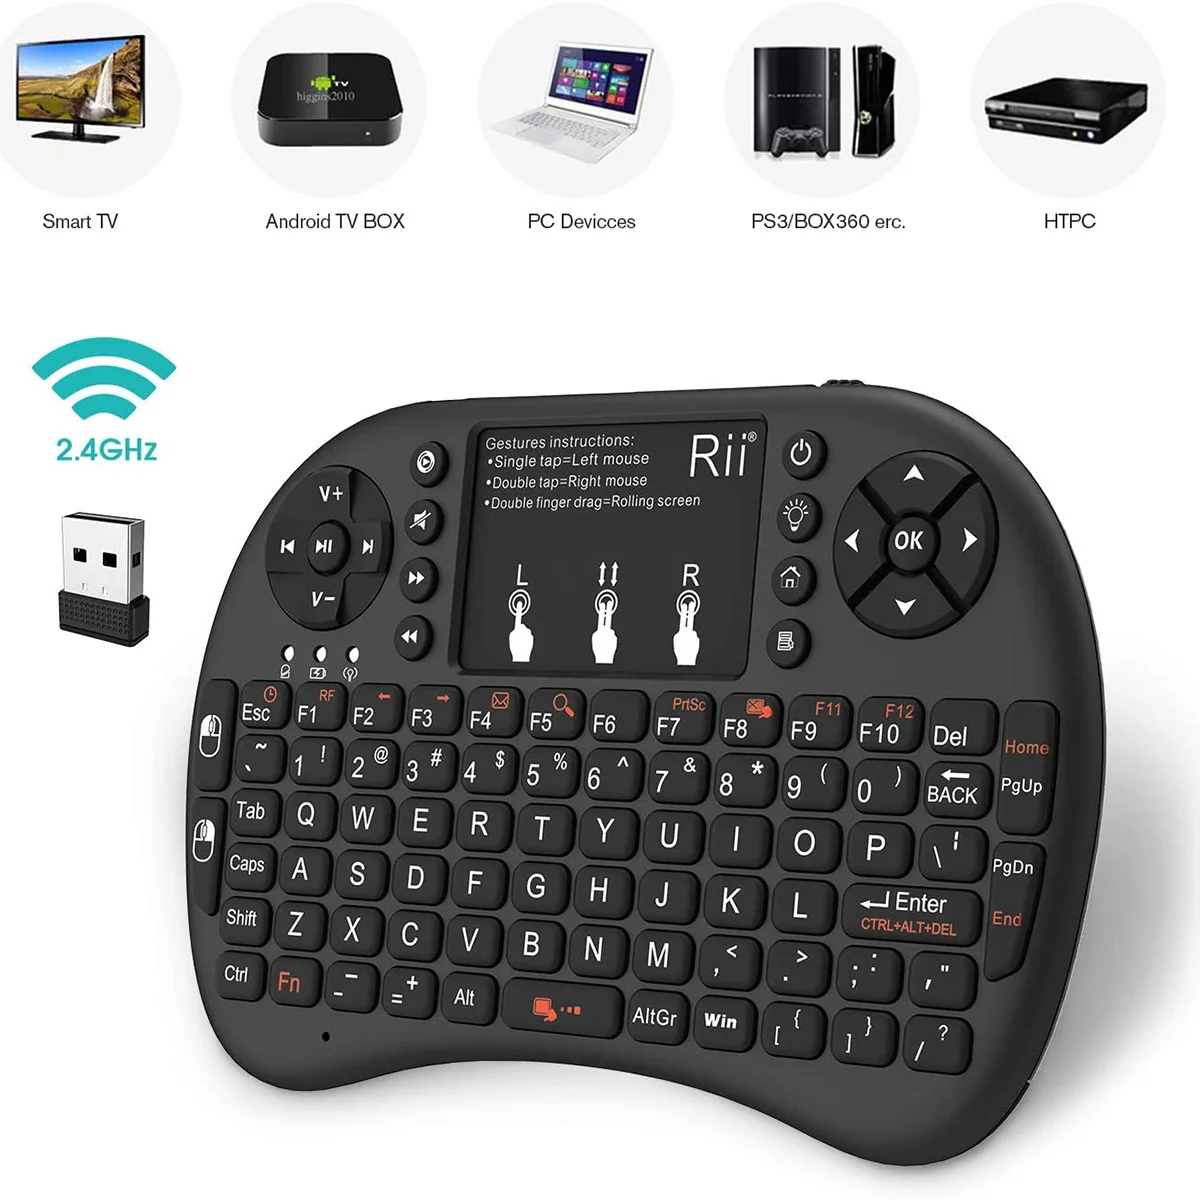 Rii i8+ Mini wireless keyboard 2.4GHz Wireless Keyboard with TouchPad For Android TV Box,PC,Laptop,Smart TV,HTPC